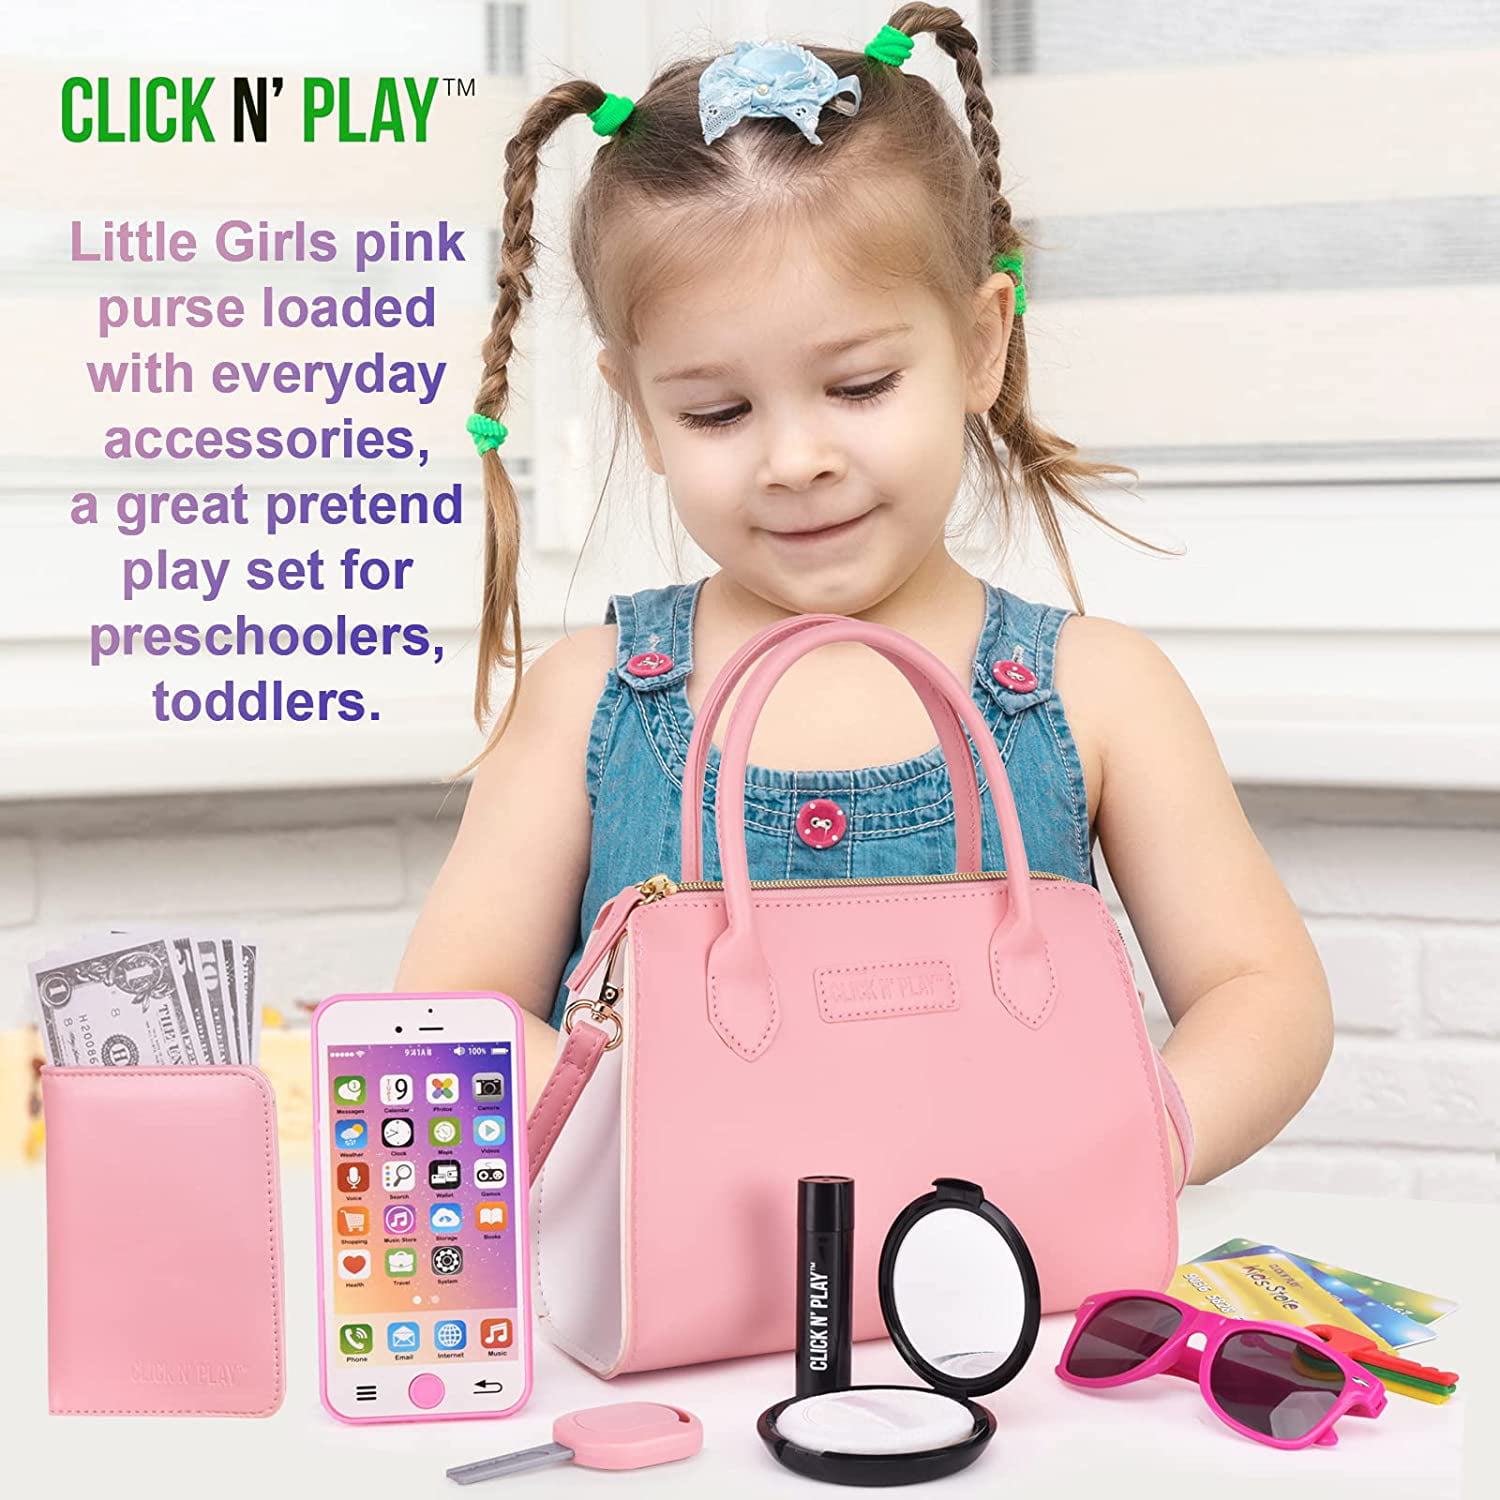 Online Bargains for 5-13 year olds - I know a little girl who's going to  love this for Christmas 🎁🎄 Little Girls Purse with Accessories and  Pretend Makeup for Toddlers - My